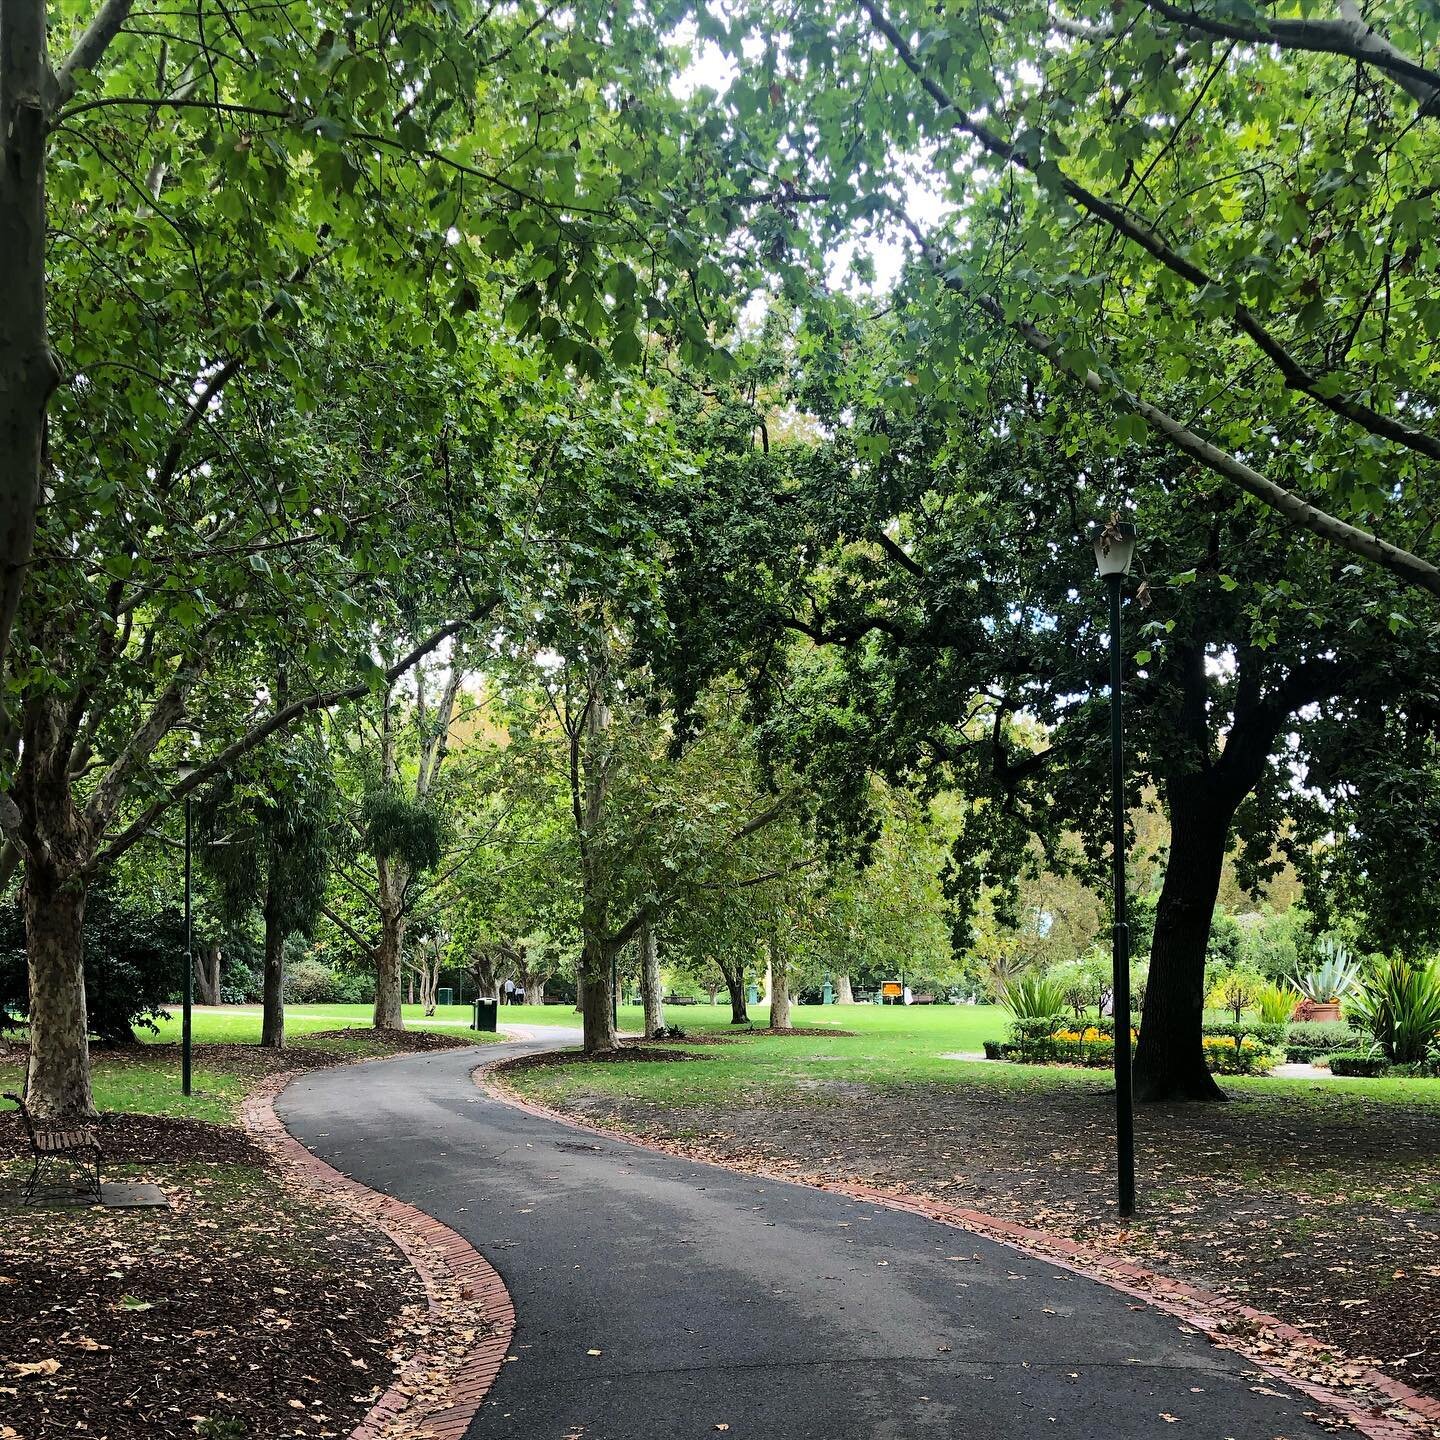 Getting in my daily nature time on the way back from the post office.
.
The current lockdown is likely impacting your capacity to engage with nature, particularly if you live in an apartment. Spending time in nature has a range of health benefits:
- 